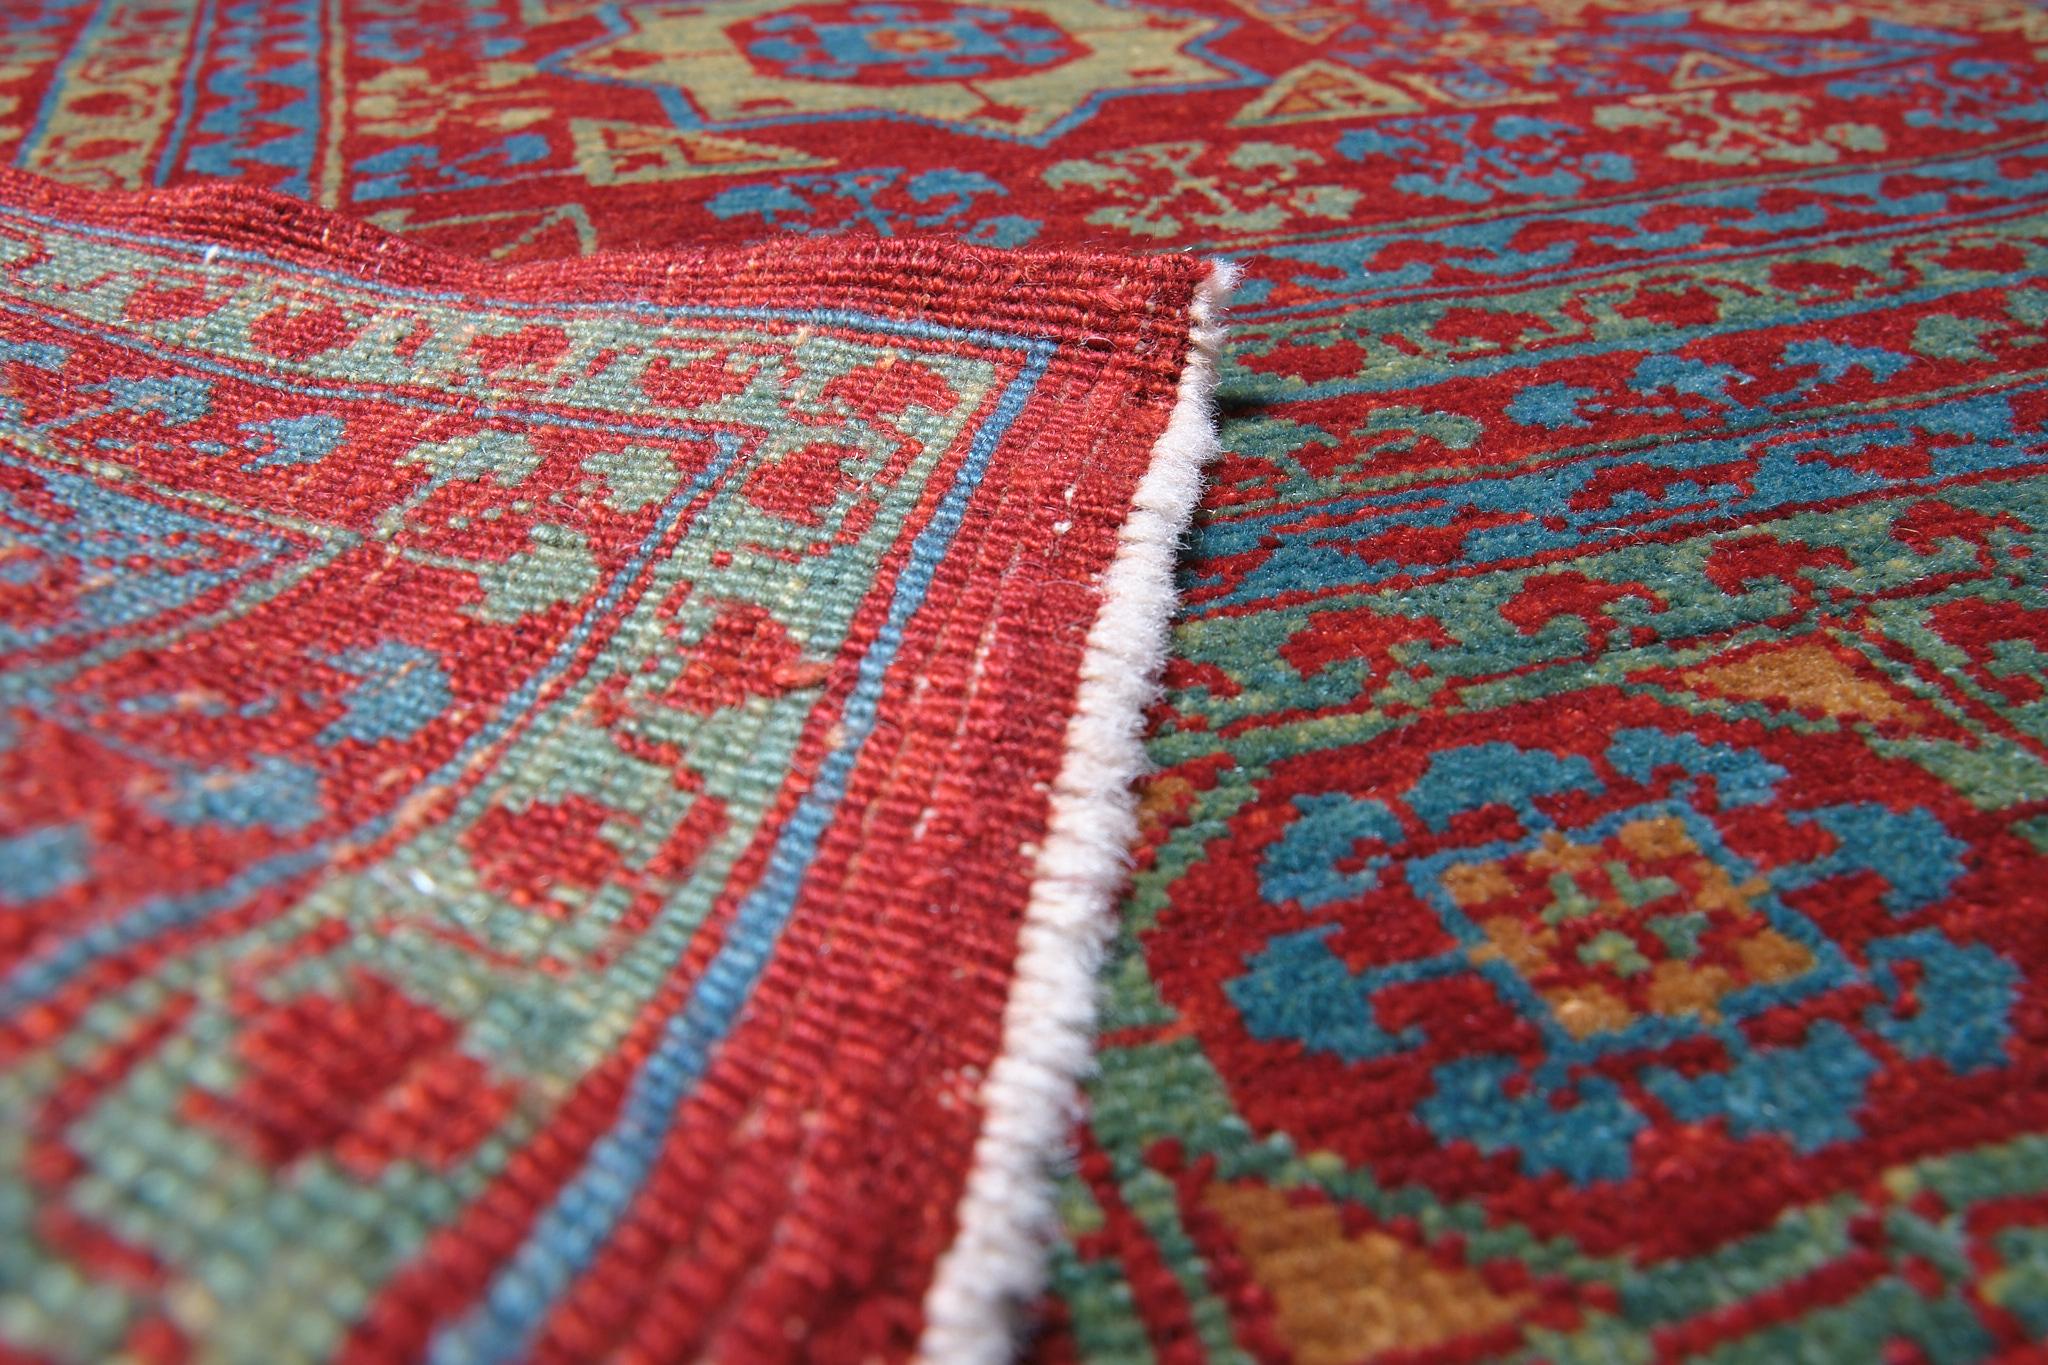 Hand-Knotted Ararat Rugs Mamluk Rug with Central Star, 16th C. Revival Carpet, Natural Dyed For Sale